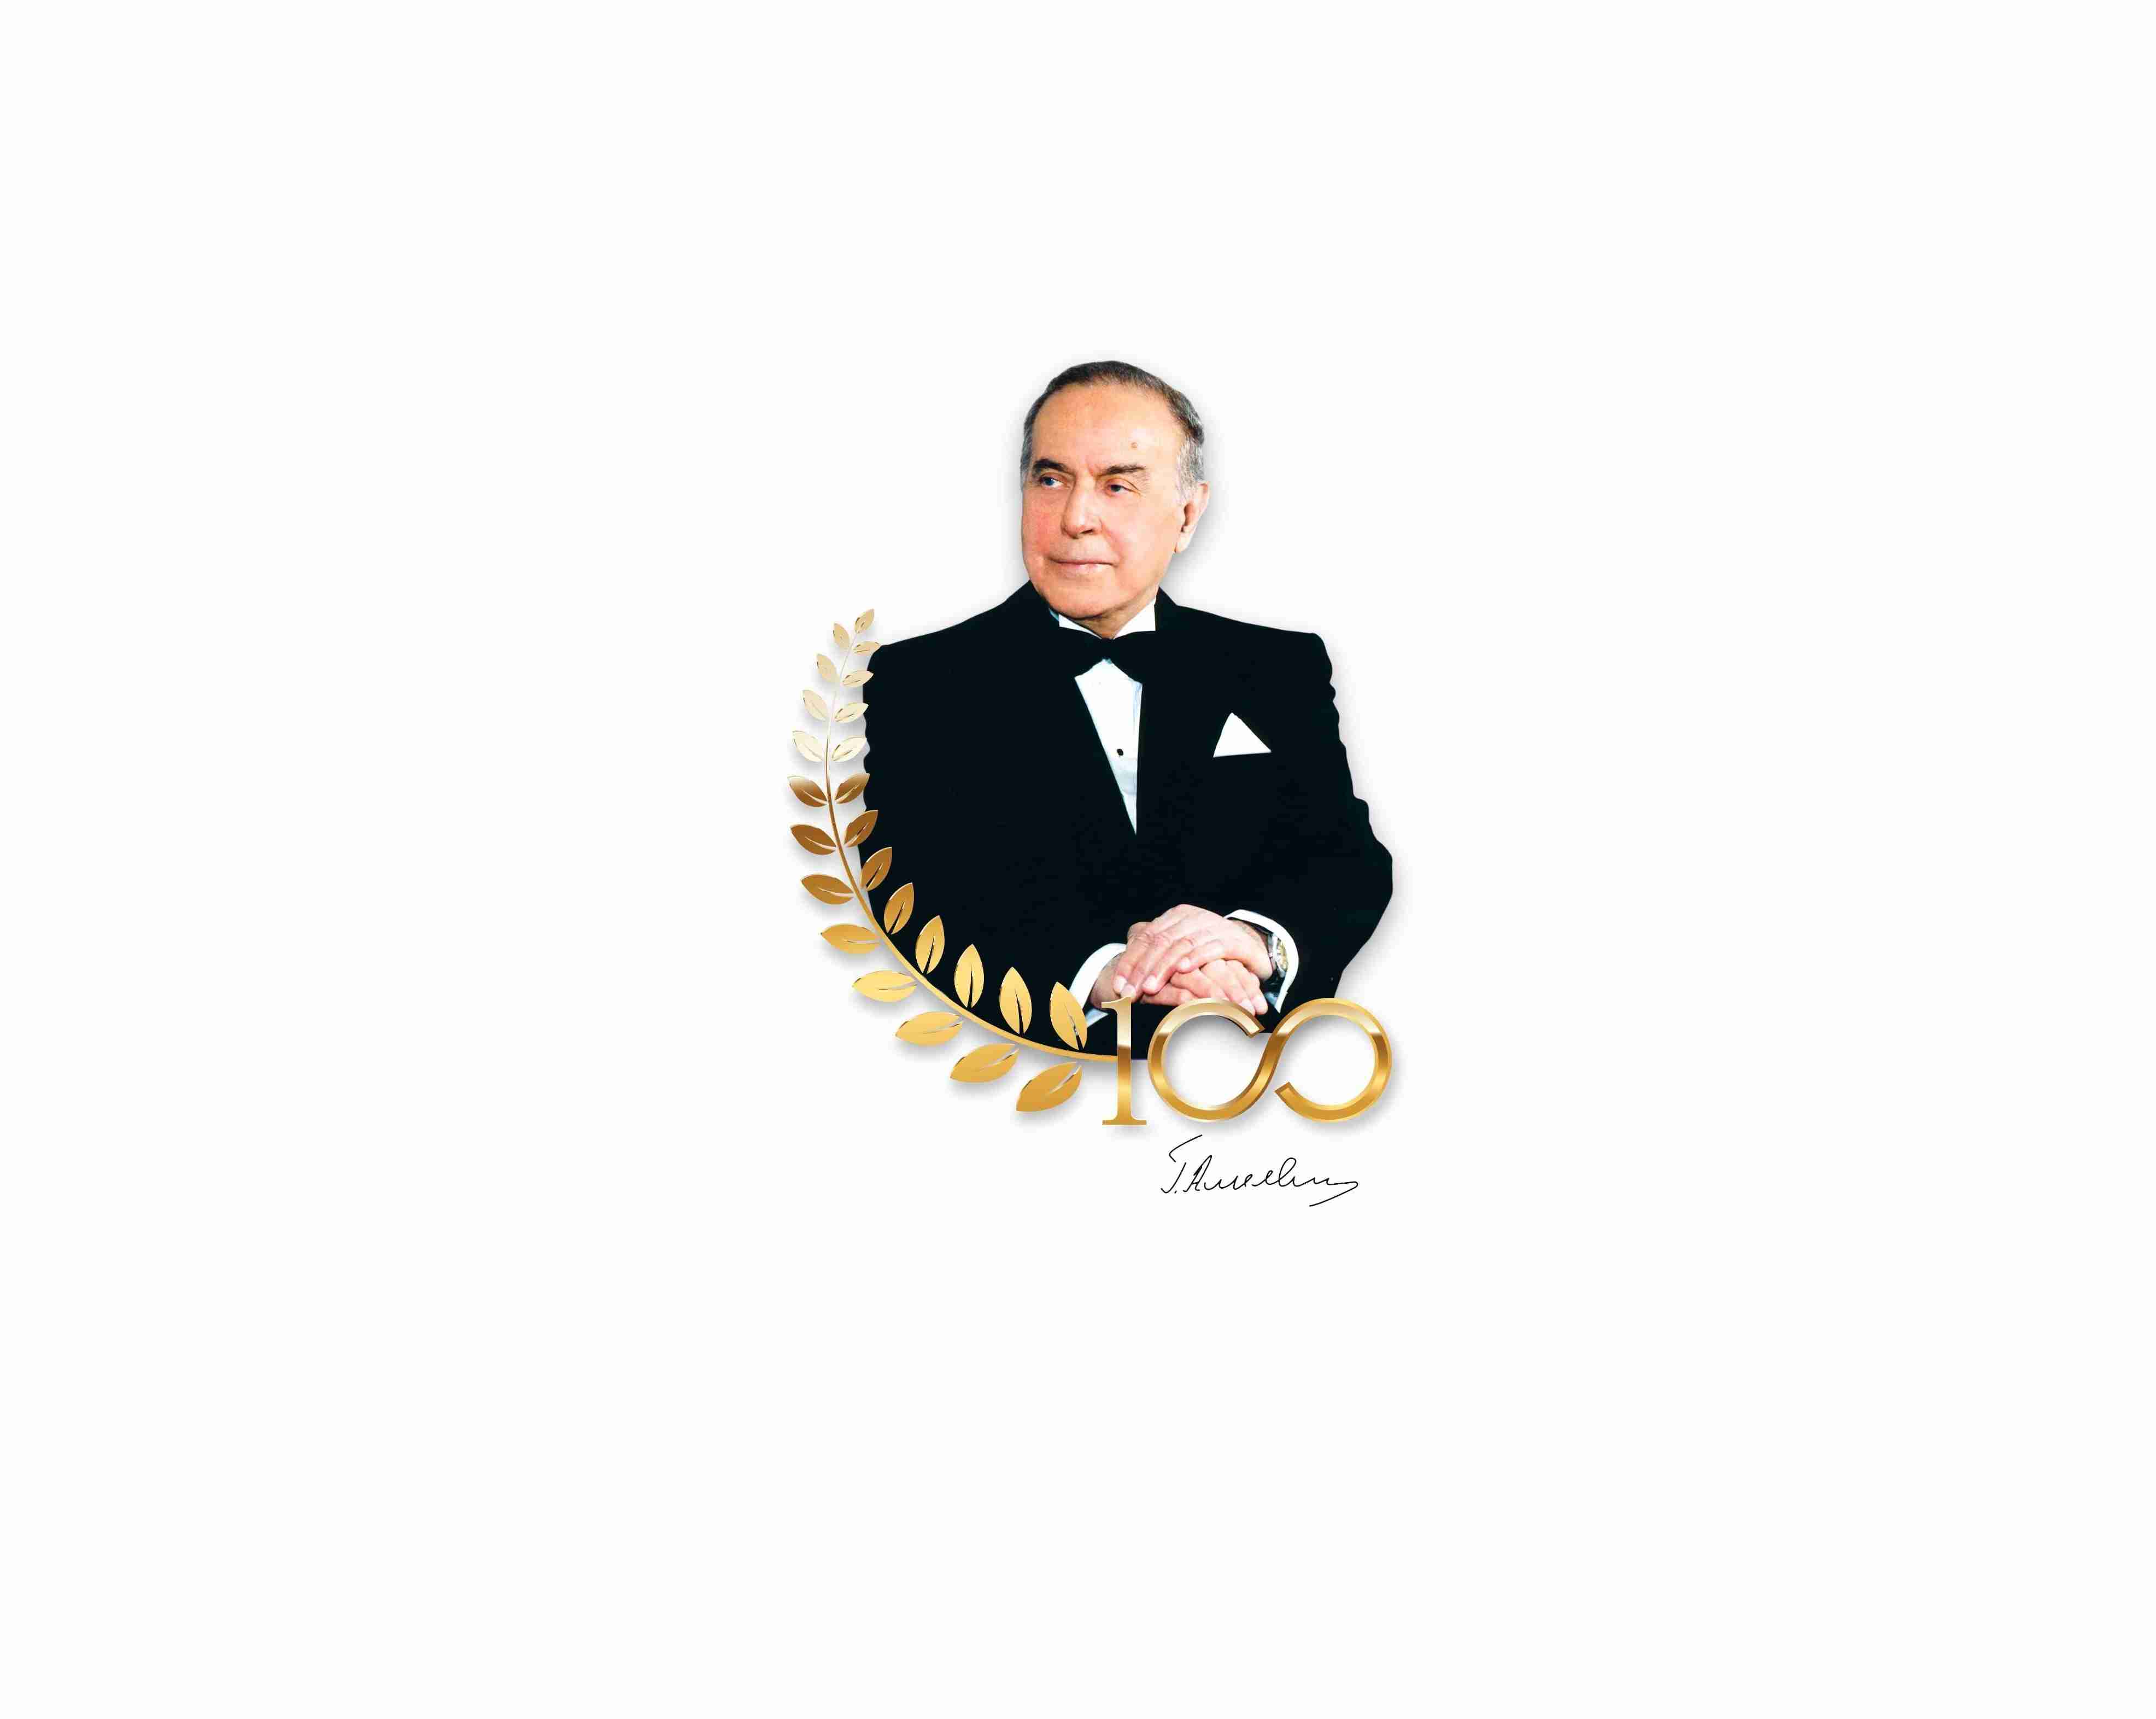 Today is the 100th anniversary of the birth of Heydar Aliyev, the National Leader of the Azerbaijani people